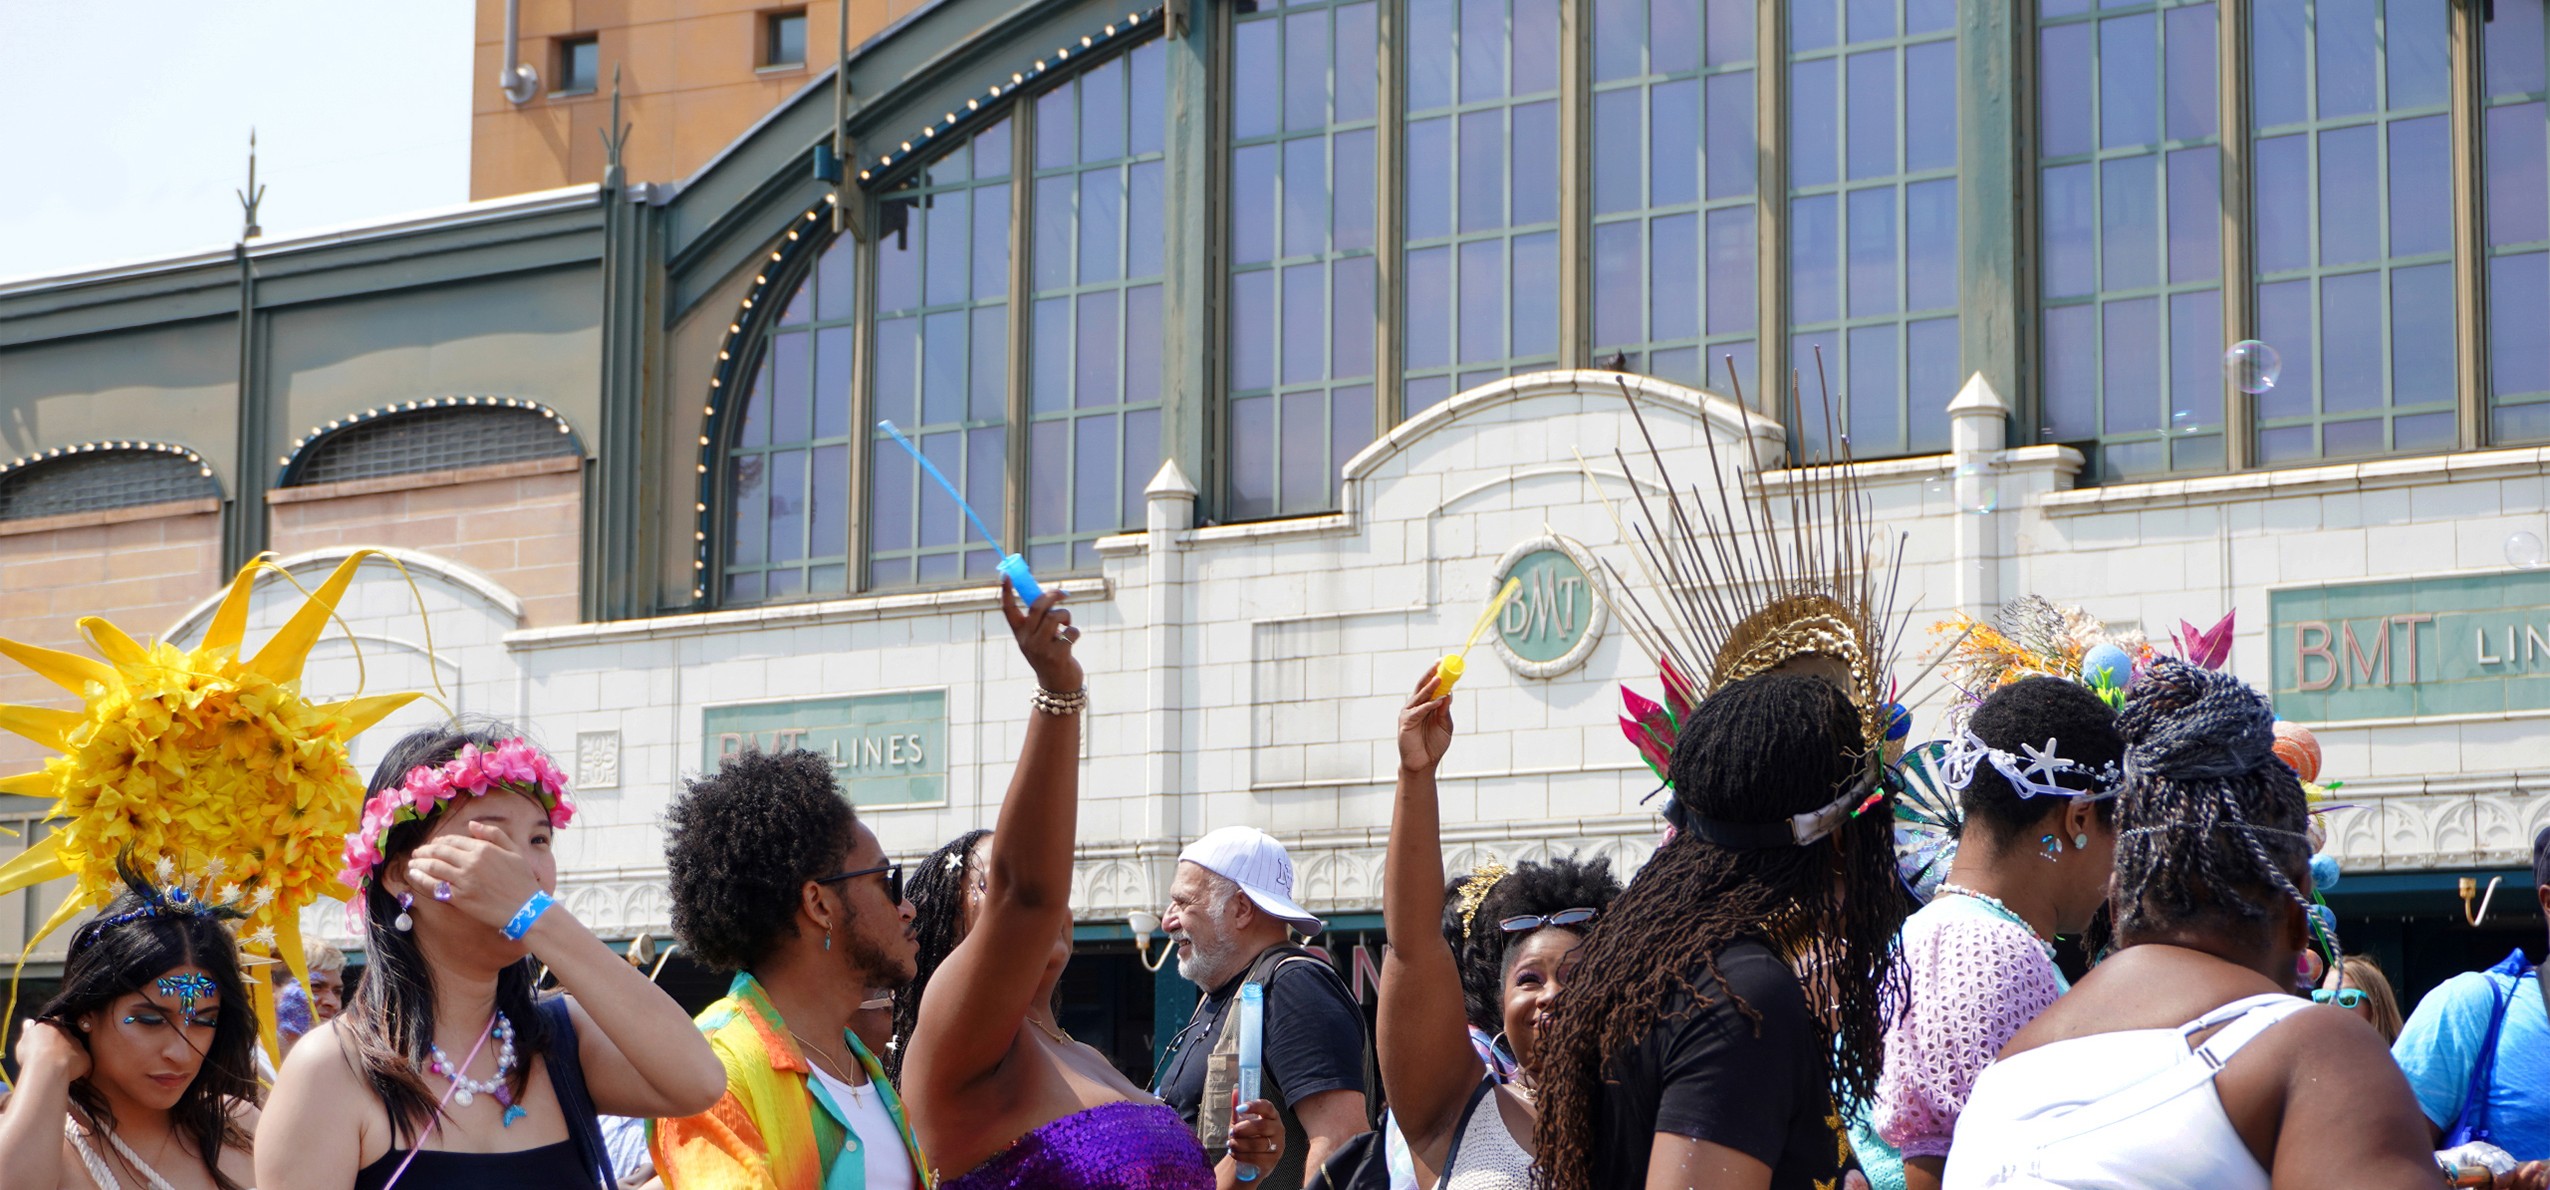 41st Annual Mermaid Parade procession in front of Stillwell Avenue Station